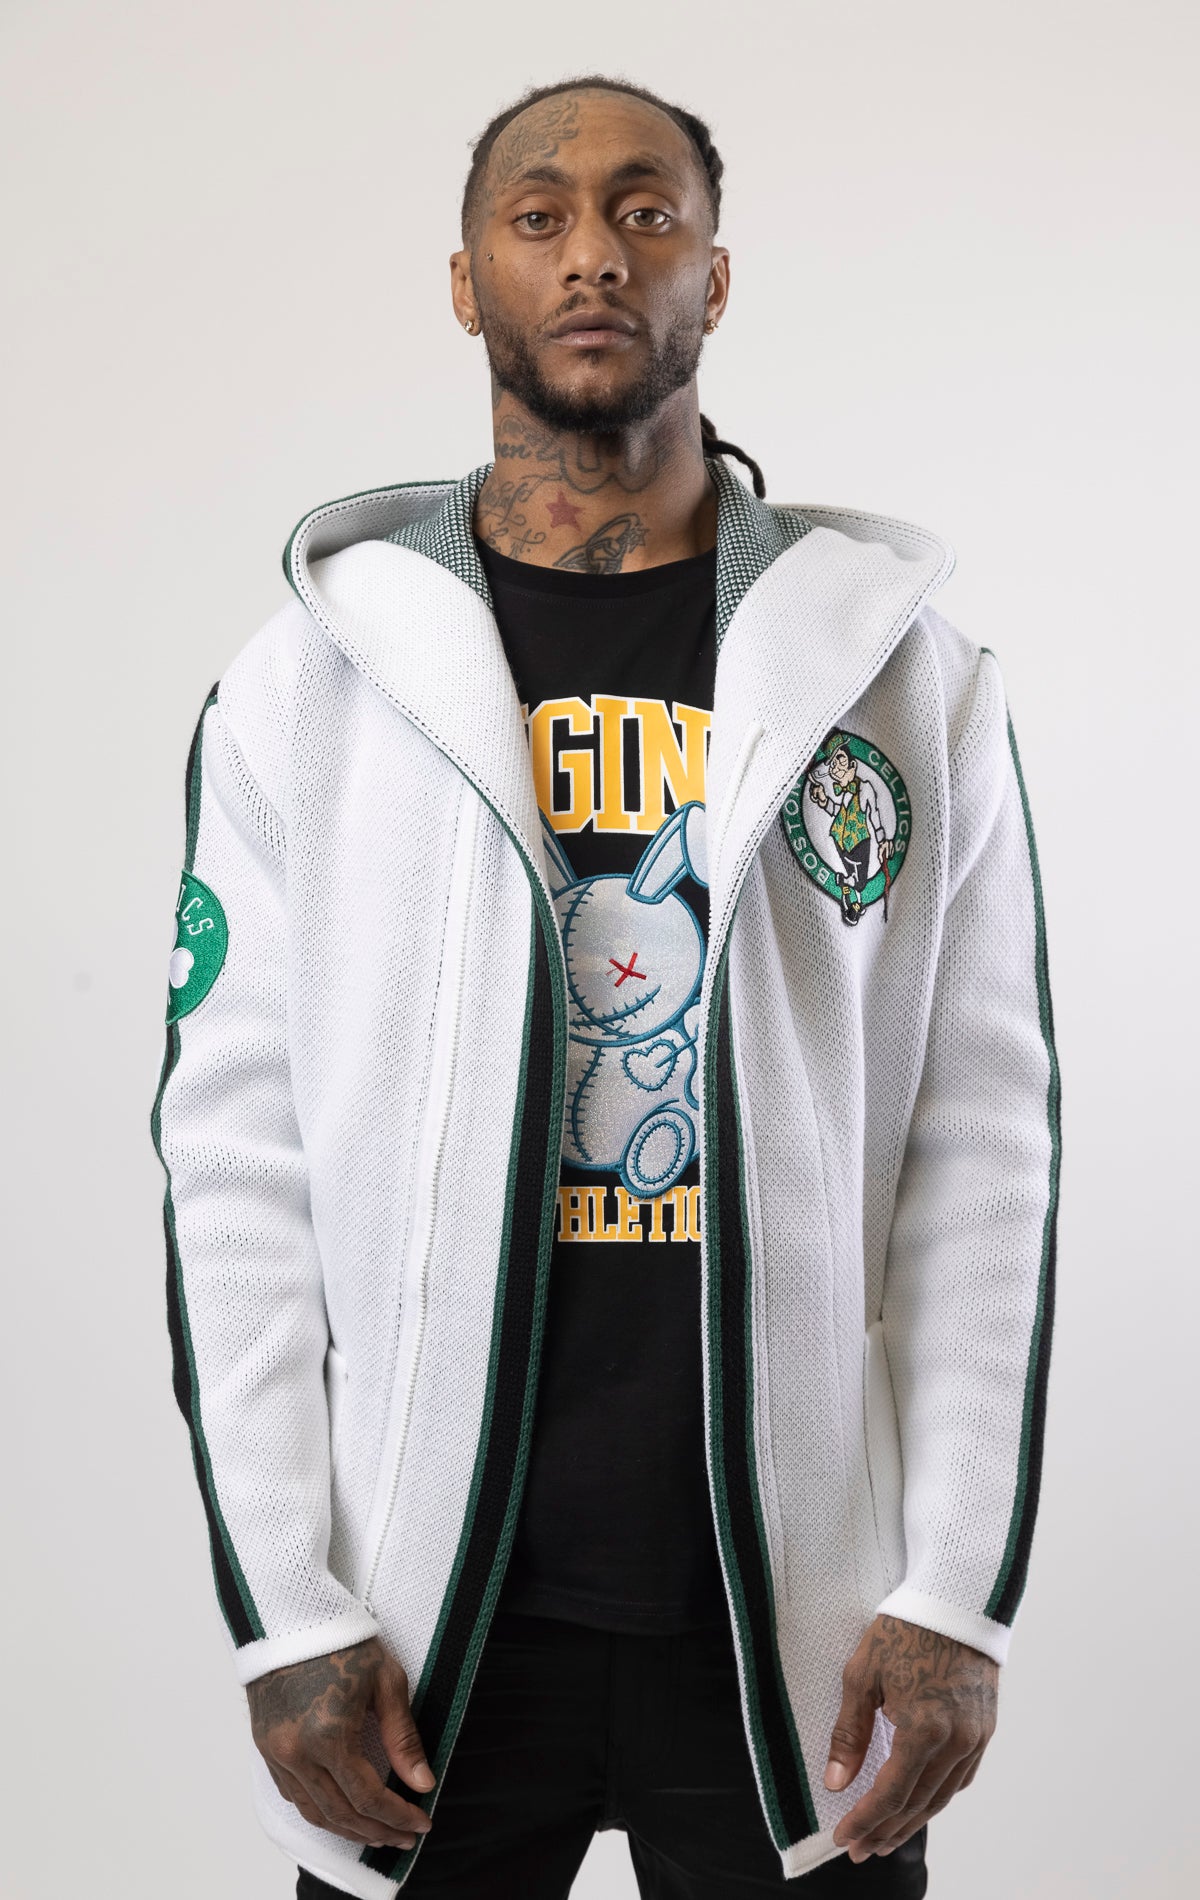 Upgrade your game day look with this Boston Celtics Cardigan Sweater. This cozy jacket is designed with a stylish three-quarter length and boasts bold team branding on the front, back, and sleeve. Complete with a full-zip closure, attached hood, and front pockets, this knit sweater offers both comfort and style.